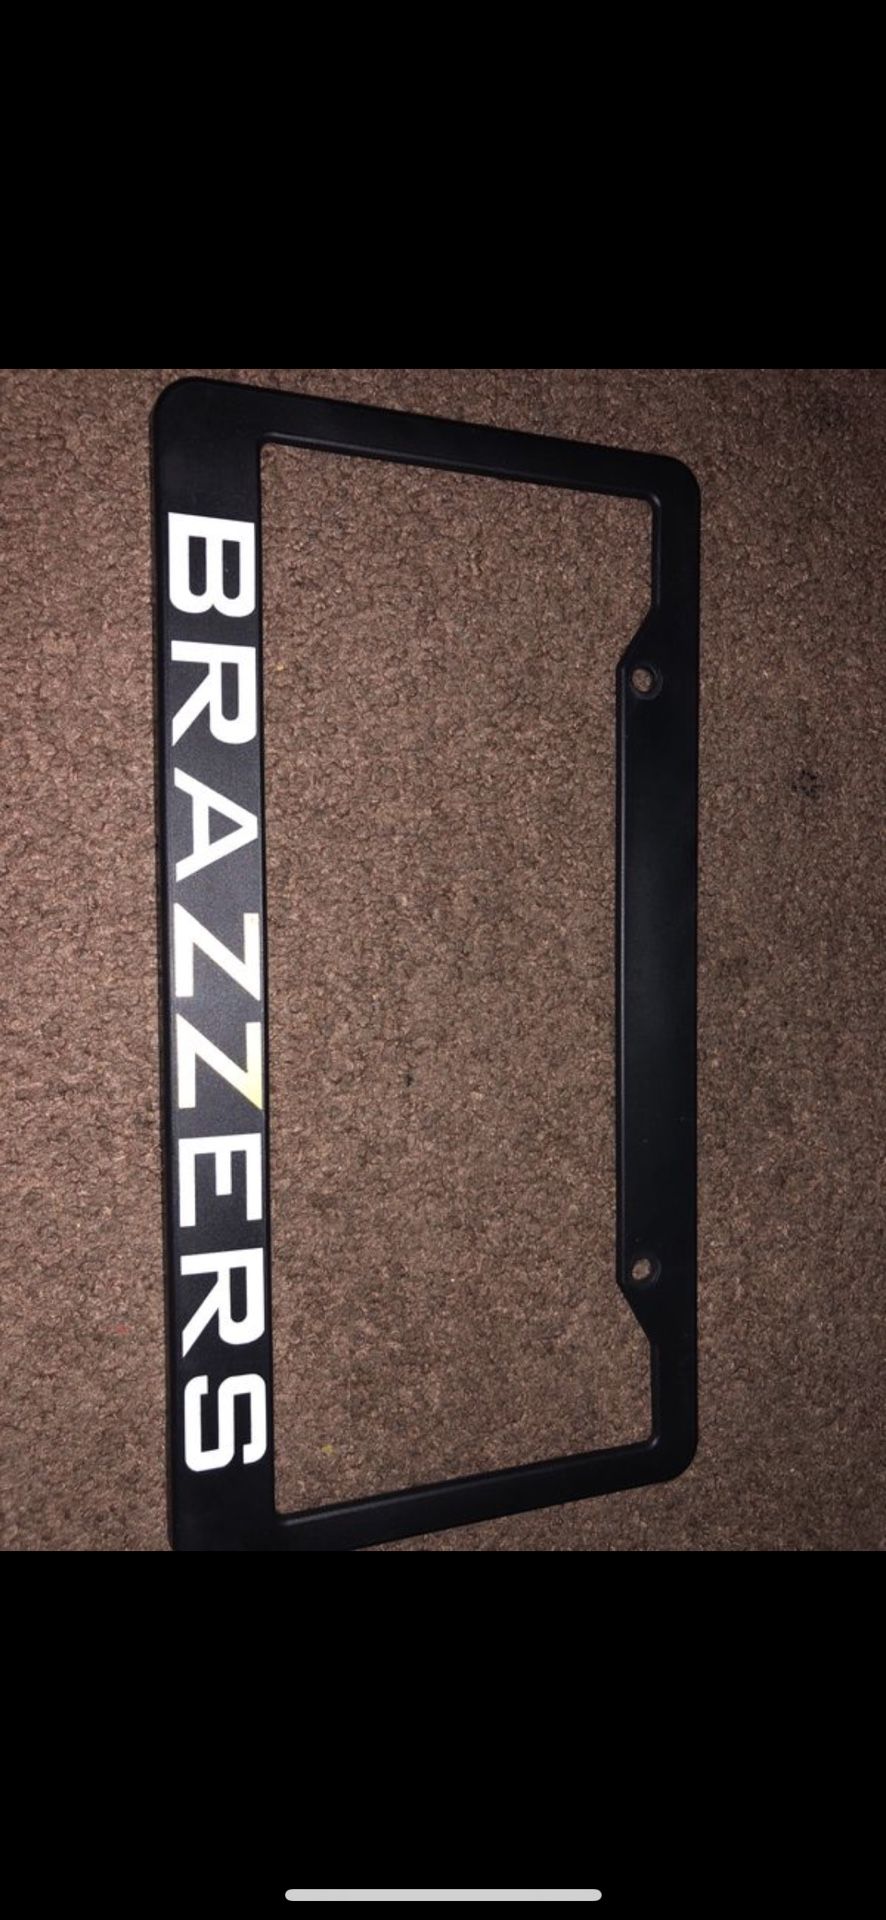 Brazzers License Plate Frame, Car Plate Holder, Car Accessories, Metal